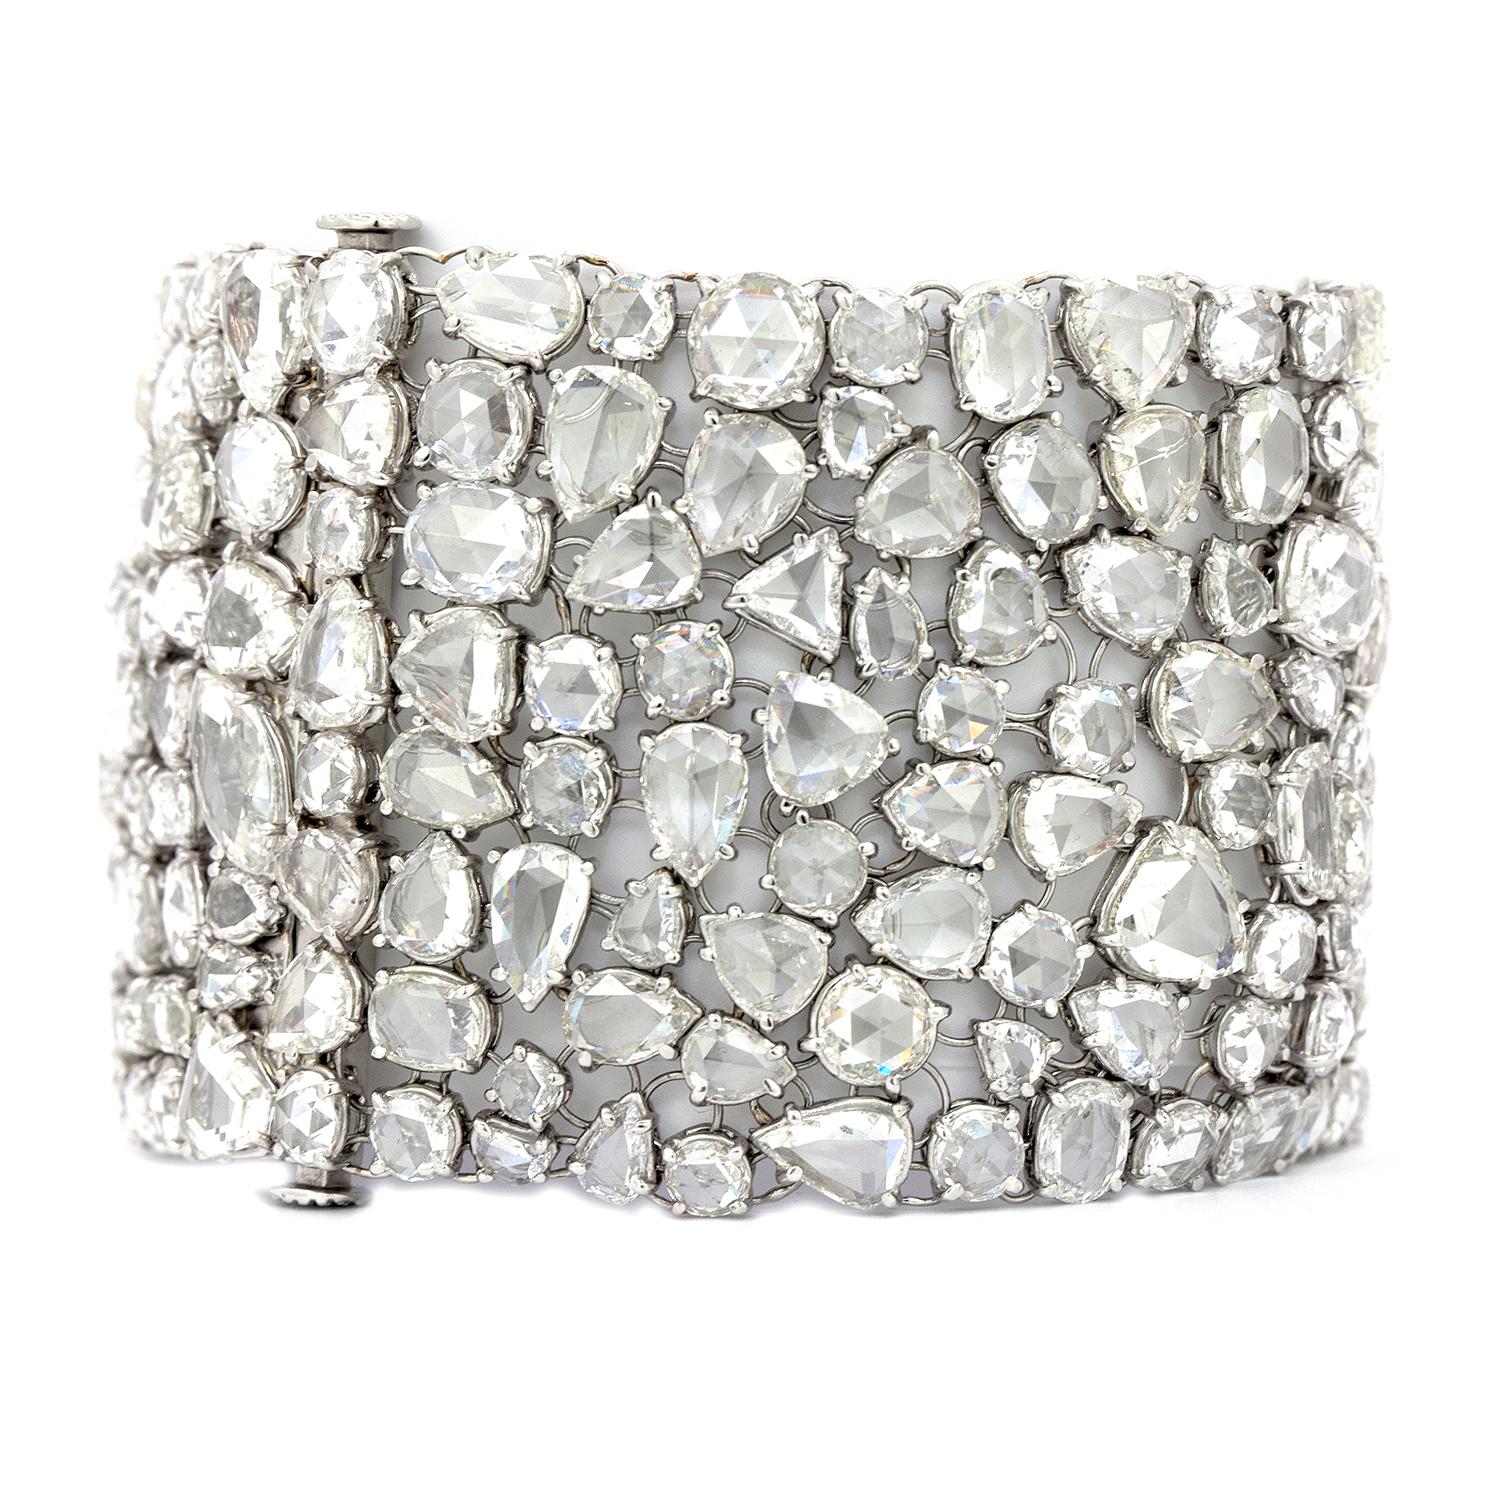 This truly unique, vintage diamond bracelet was expertly crafted in platinum for these 263 mixed shaped rose cut diamonds that weigh 100.37cts in total. The diamonds are graded as H VS/SI1.  Each diamond is individually set in a handmade platinum